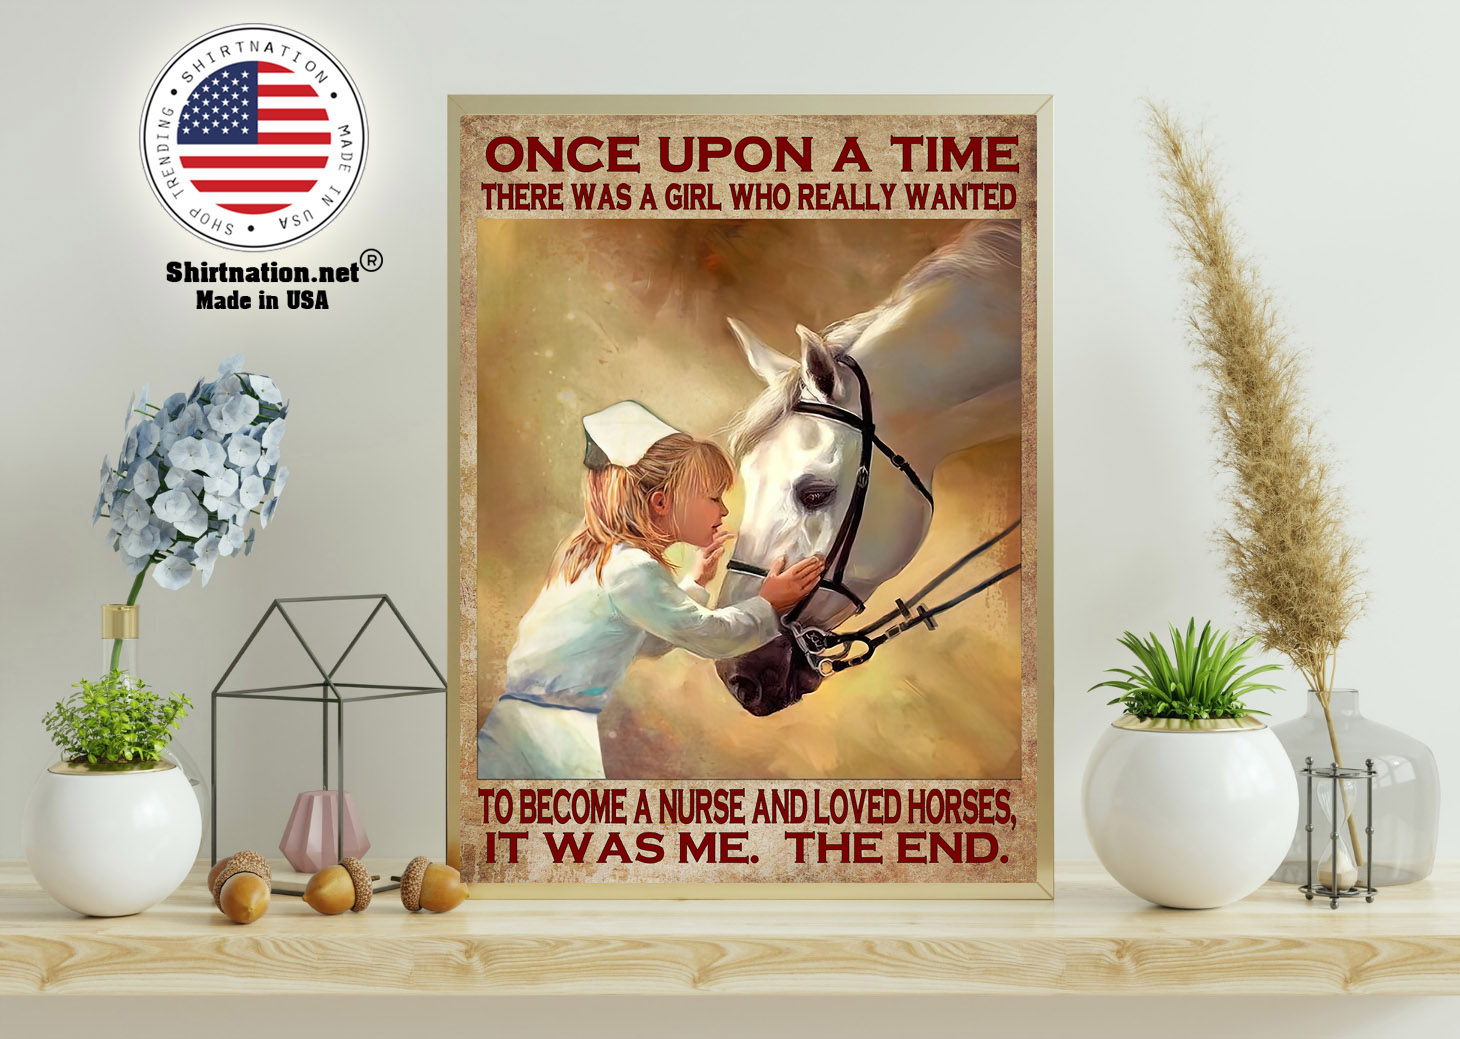 Once upon a time there was a girl who really wanted to become a nurse and loved horses poster 15